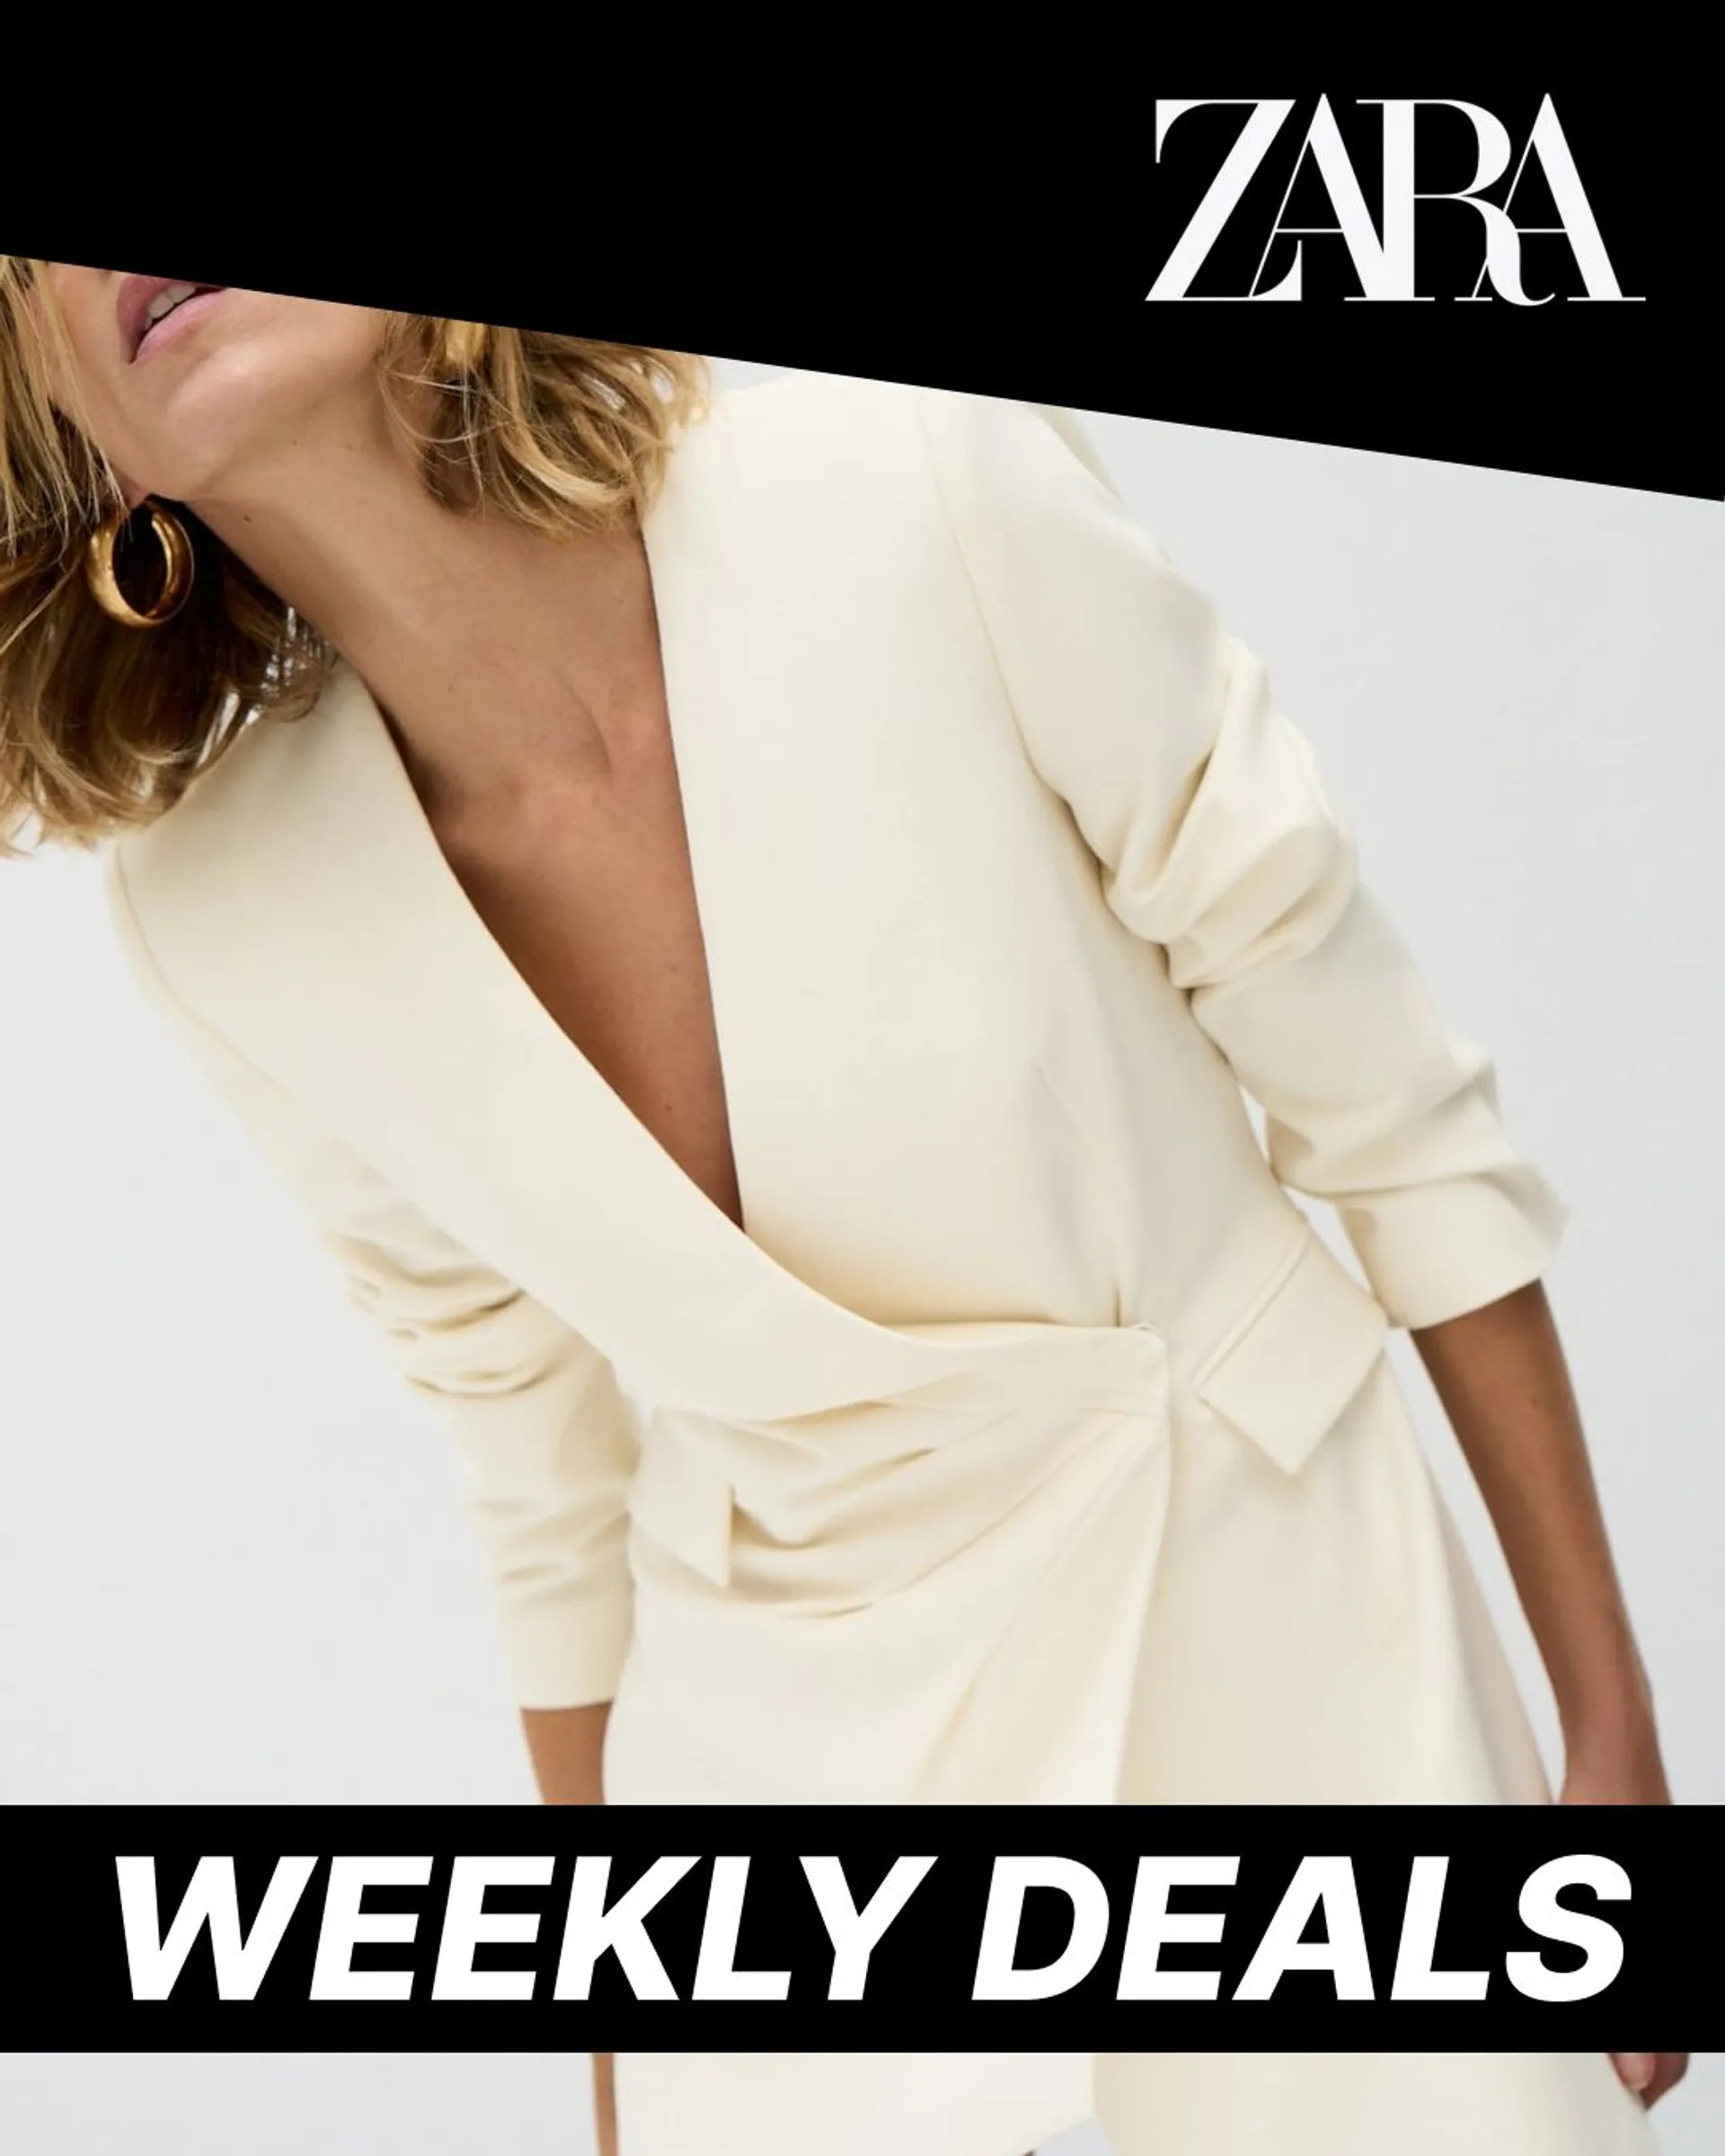 Zara - Special Price! from January 15 to January 20 2023 - flyer page 1